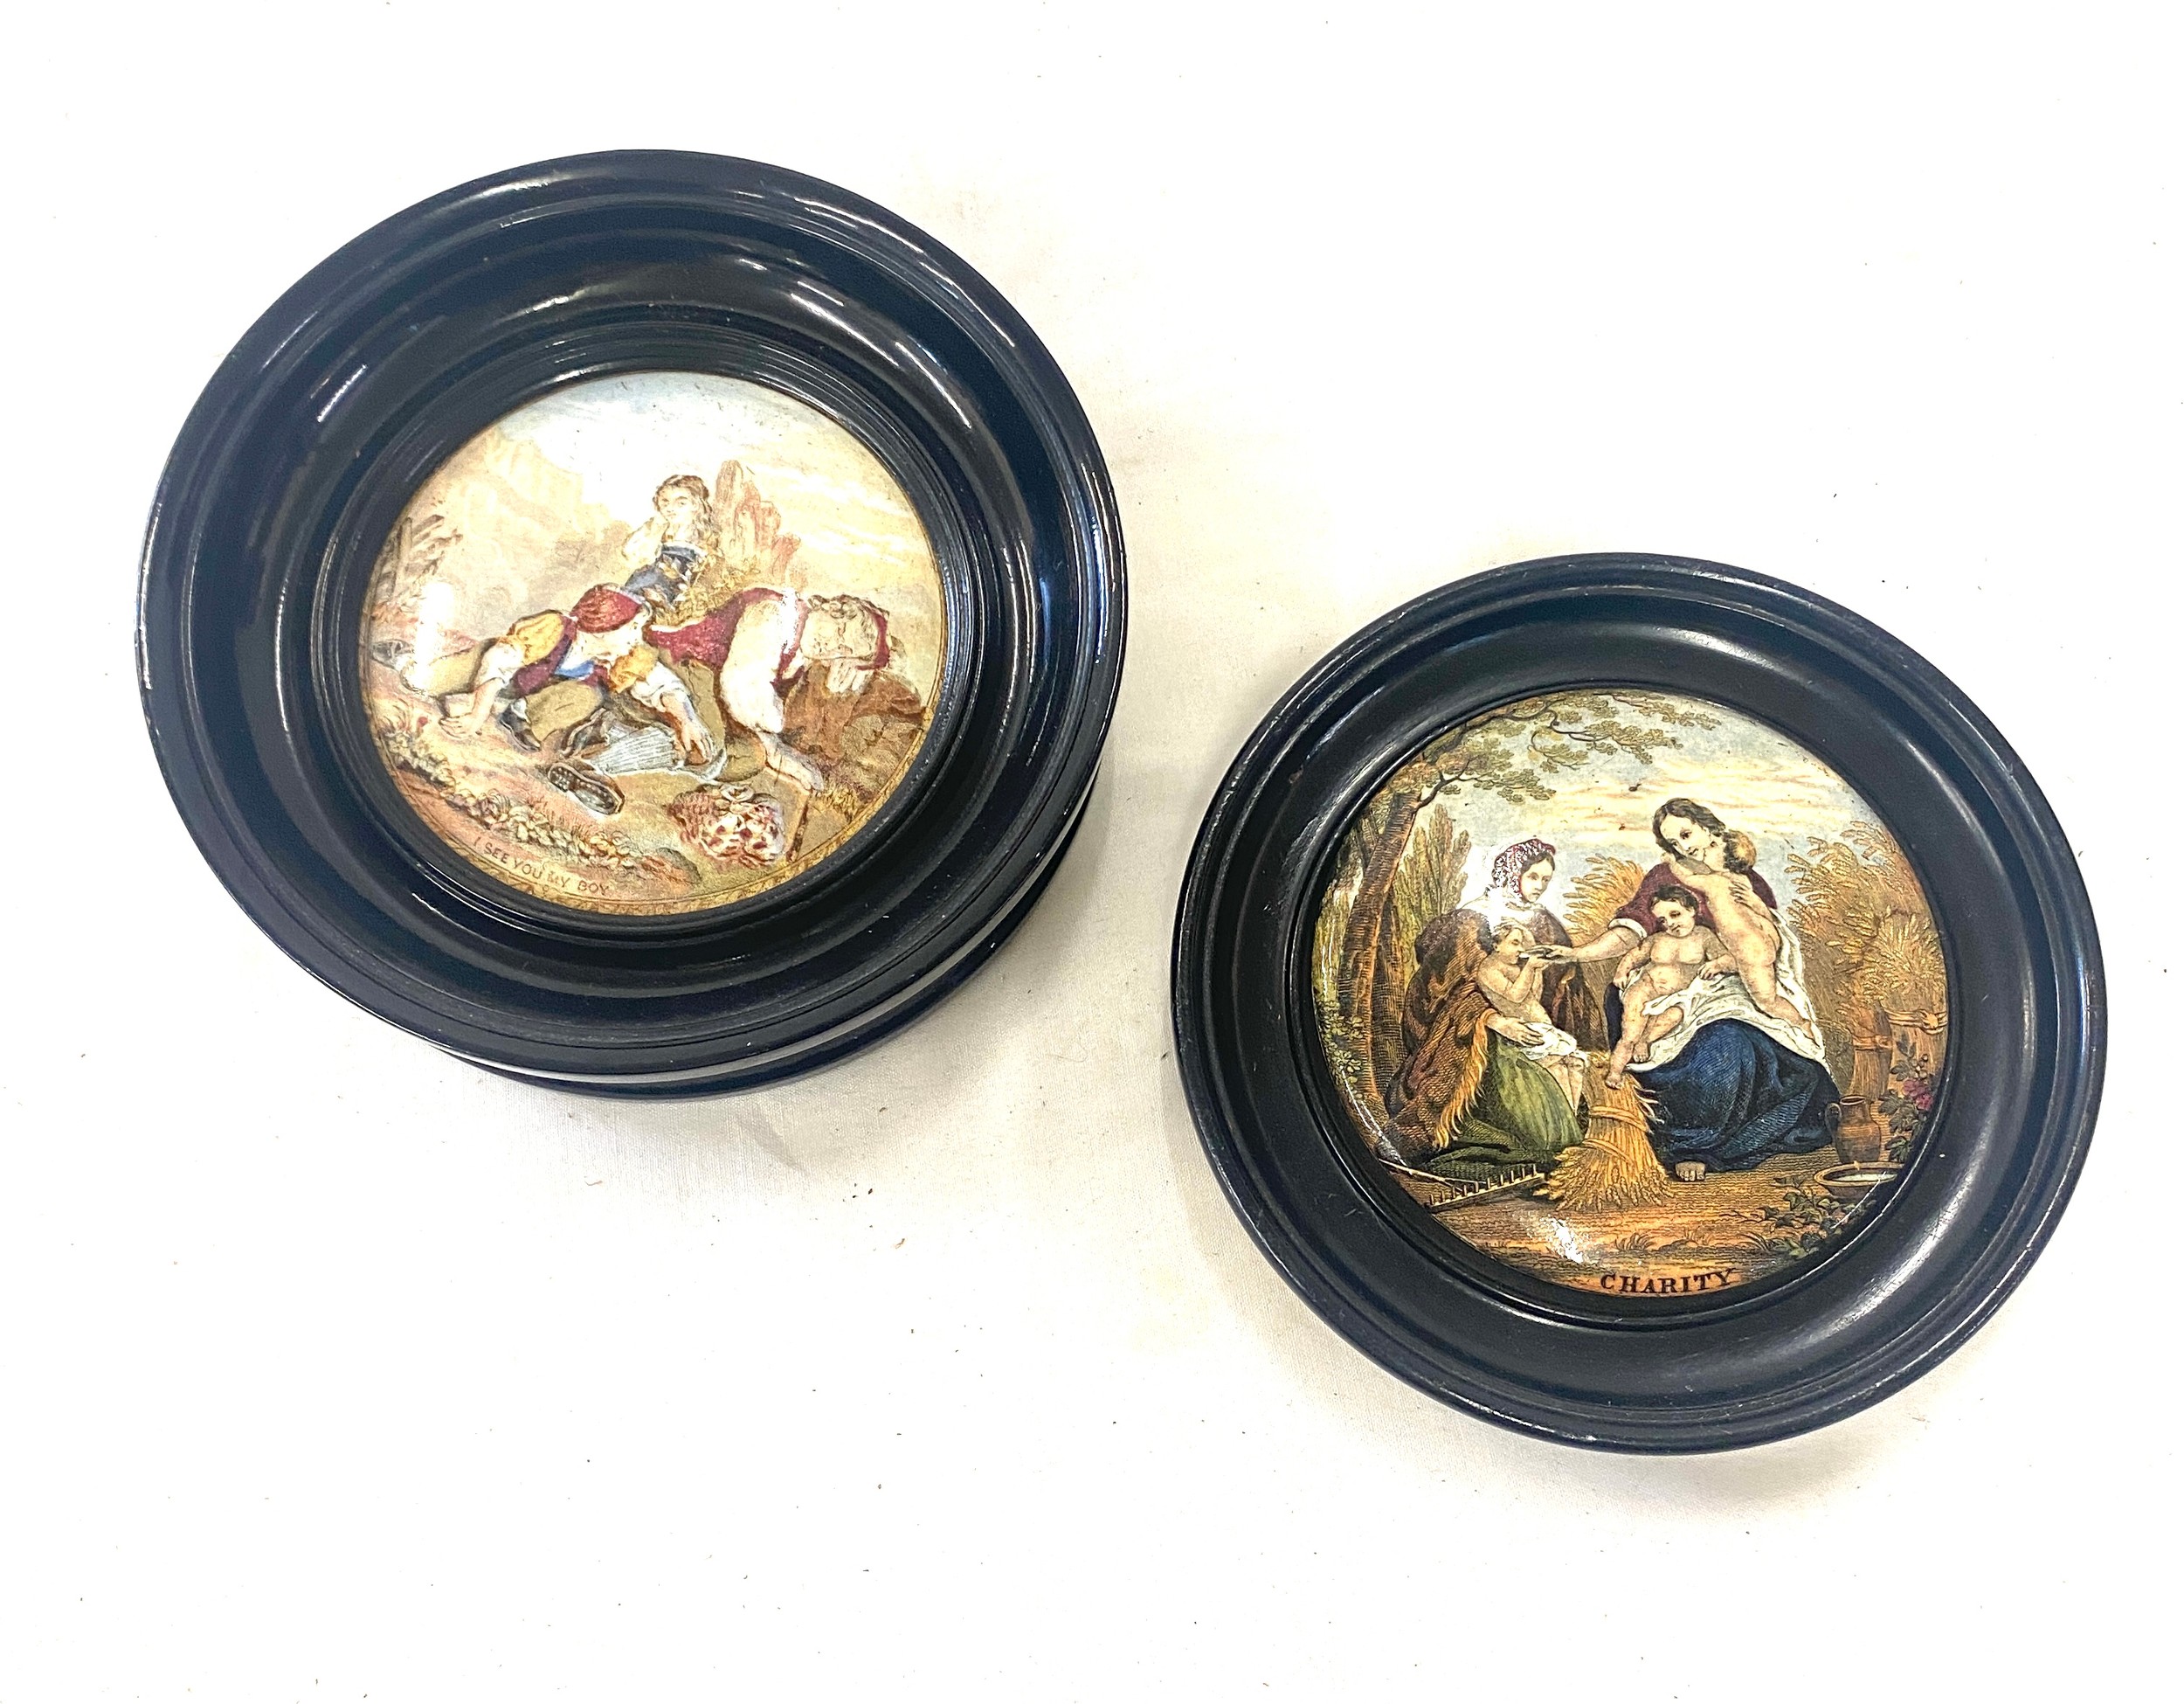 Two vintage framed pot lids includes i see you my boy and charity, largest measures approx 6.5